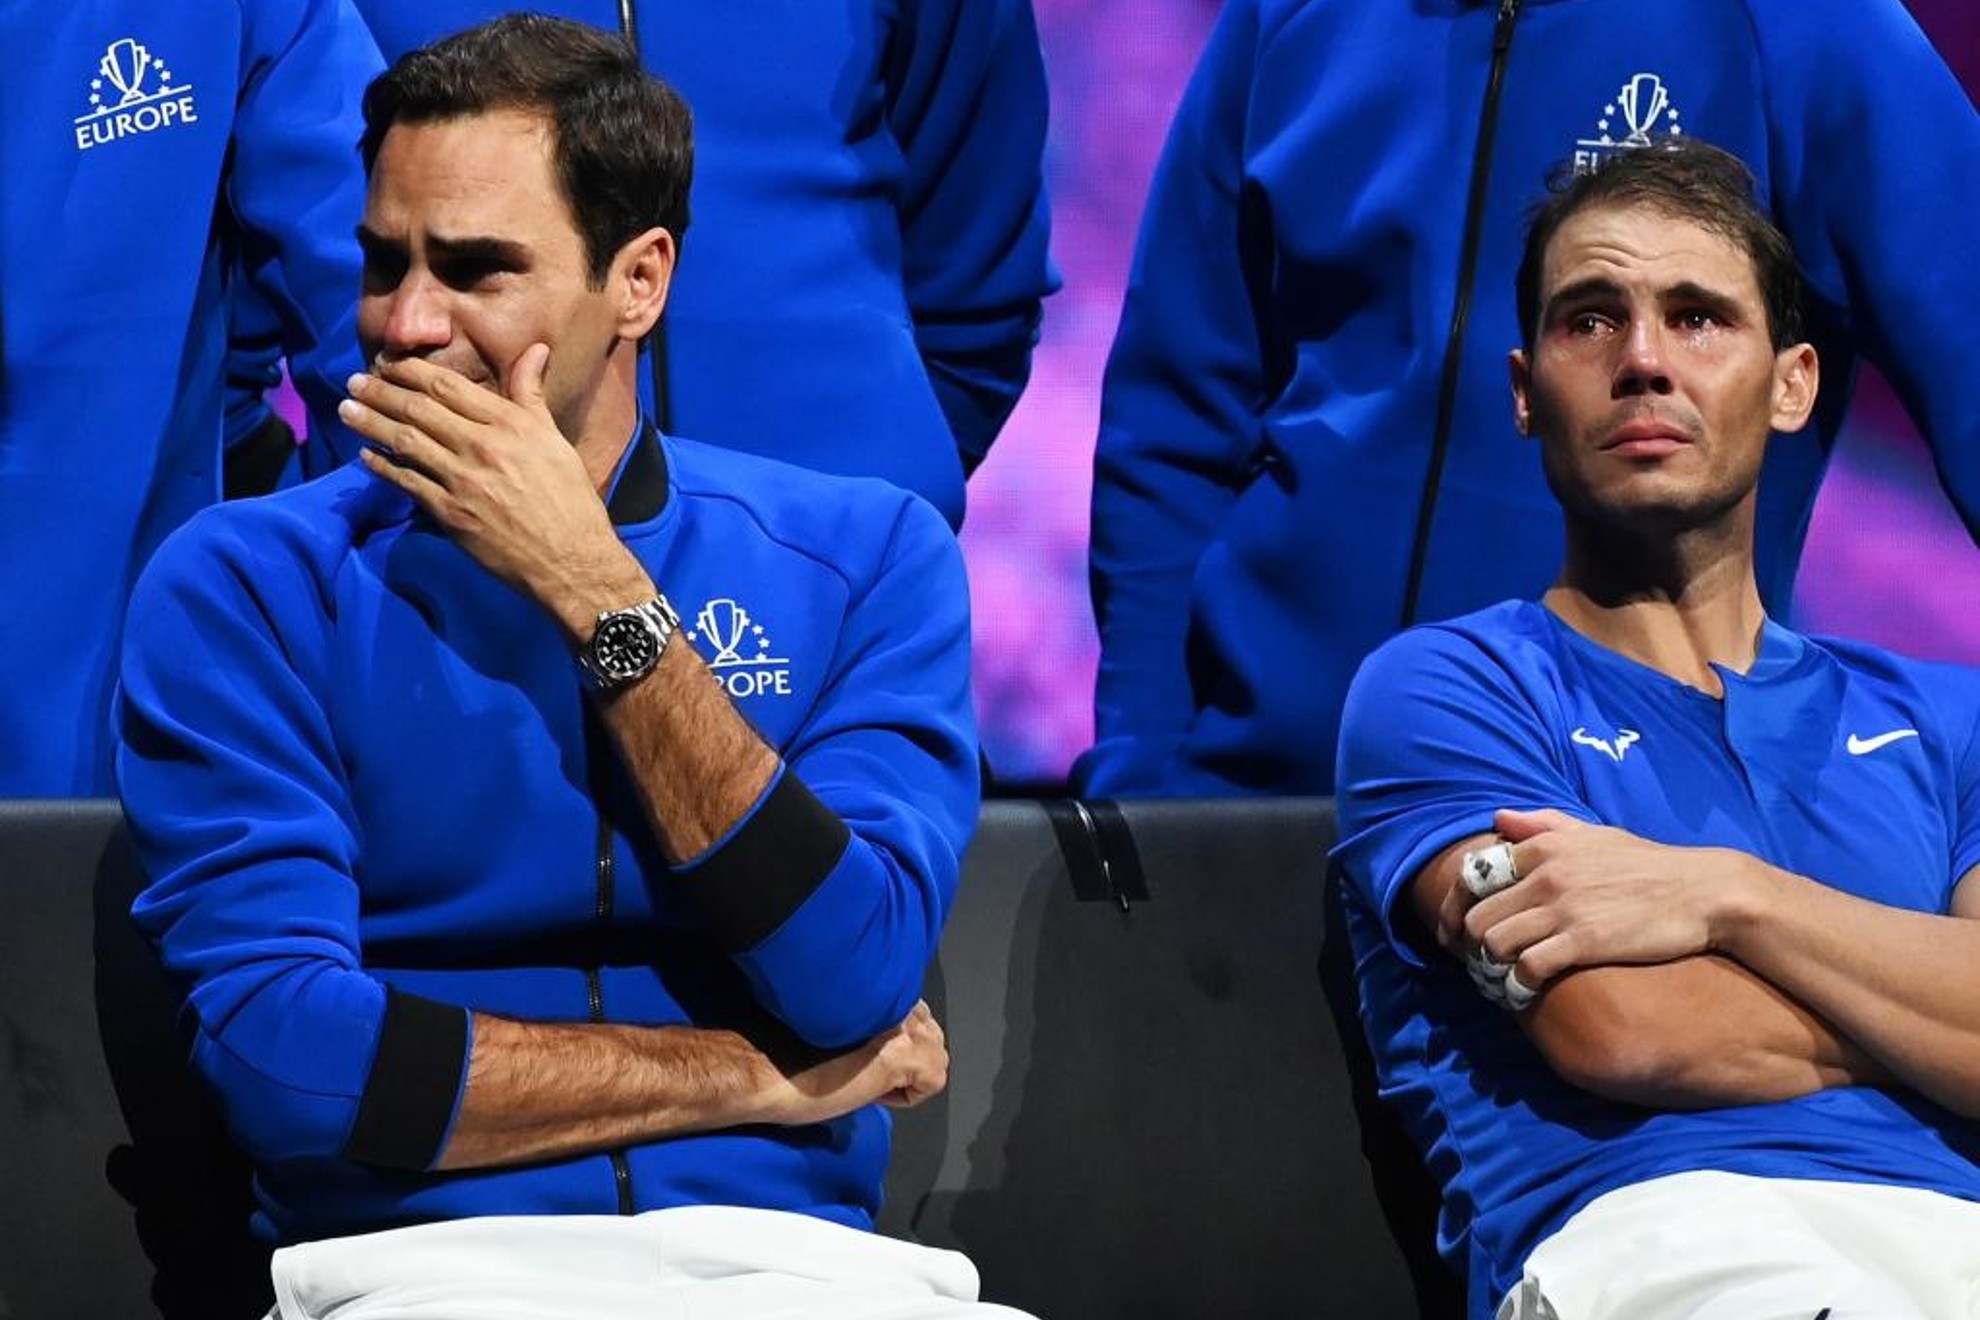 Roger Federer and Rafael Nadal at the Laver Cup / Photo: IMAGO/Antoine Couvercelle / Panoramic